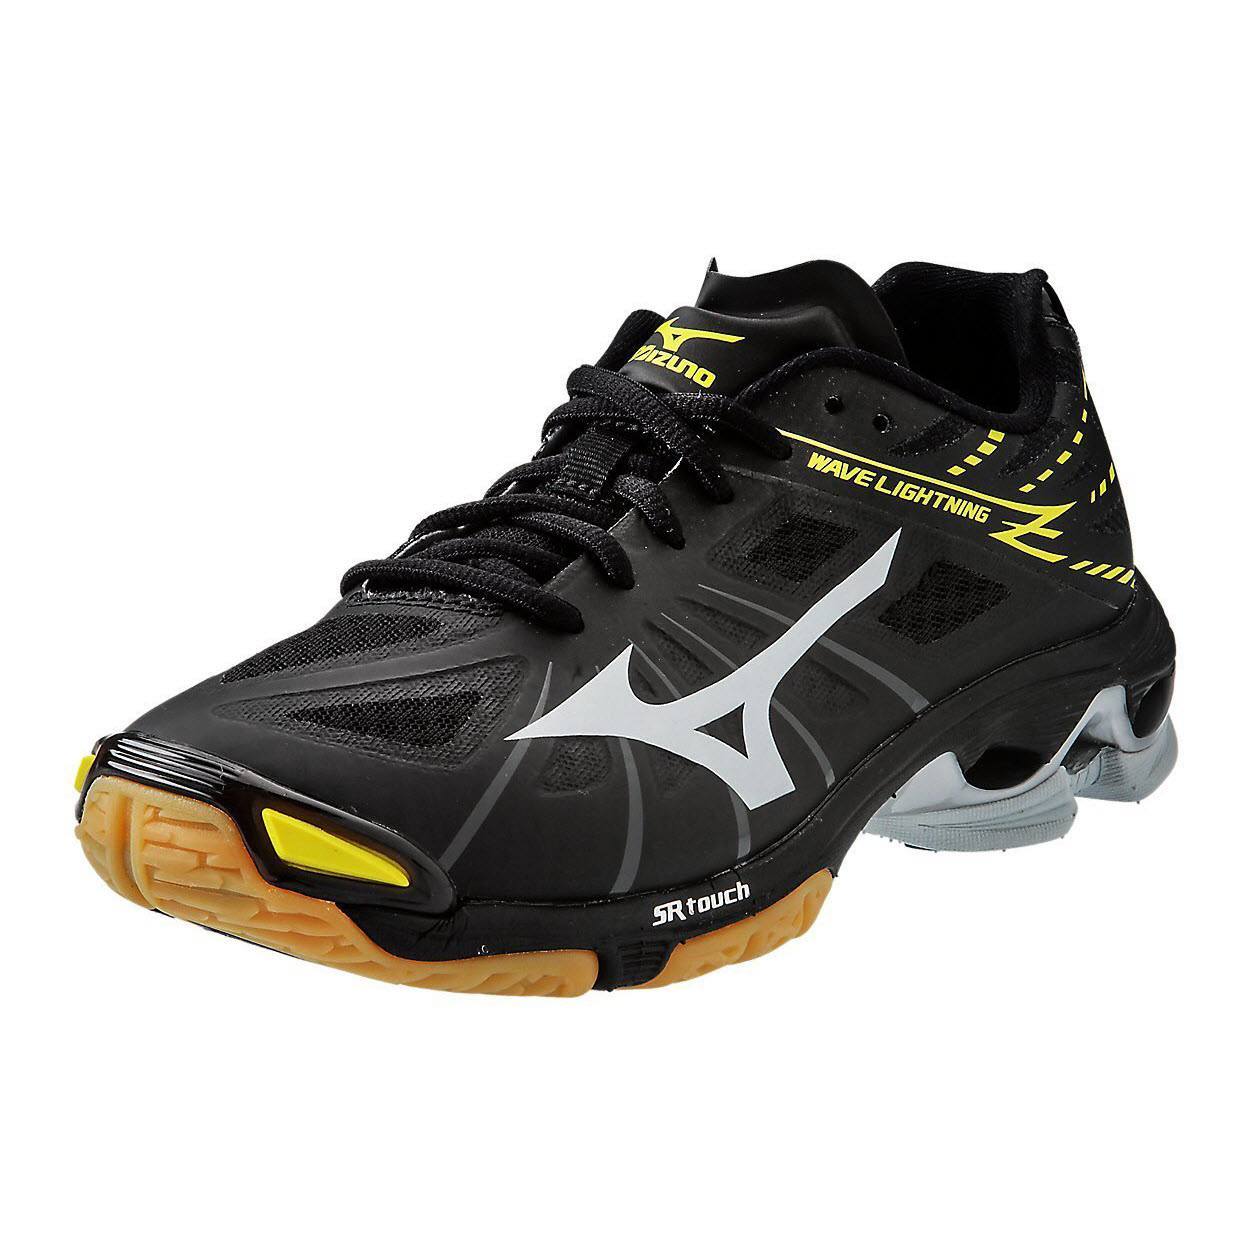 where to get cheap mizuno volleyball shoes